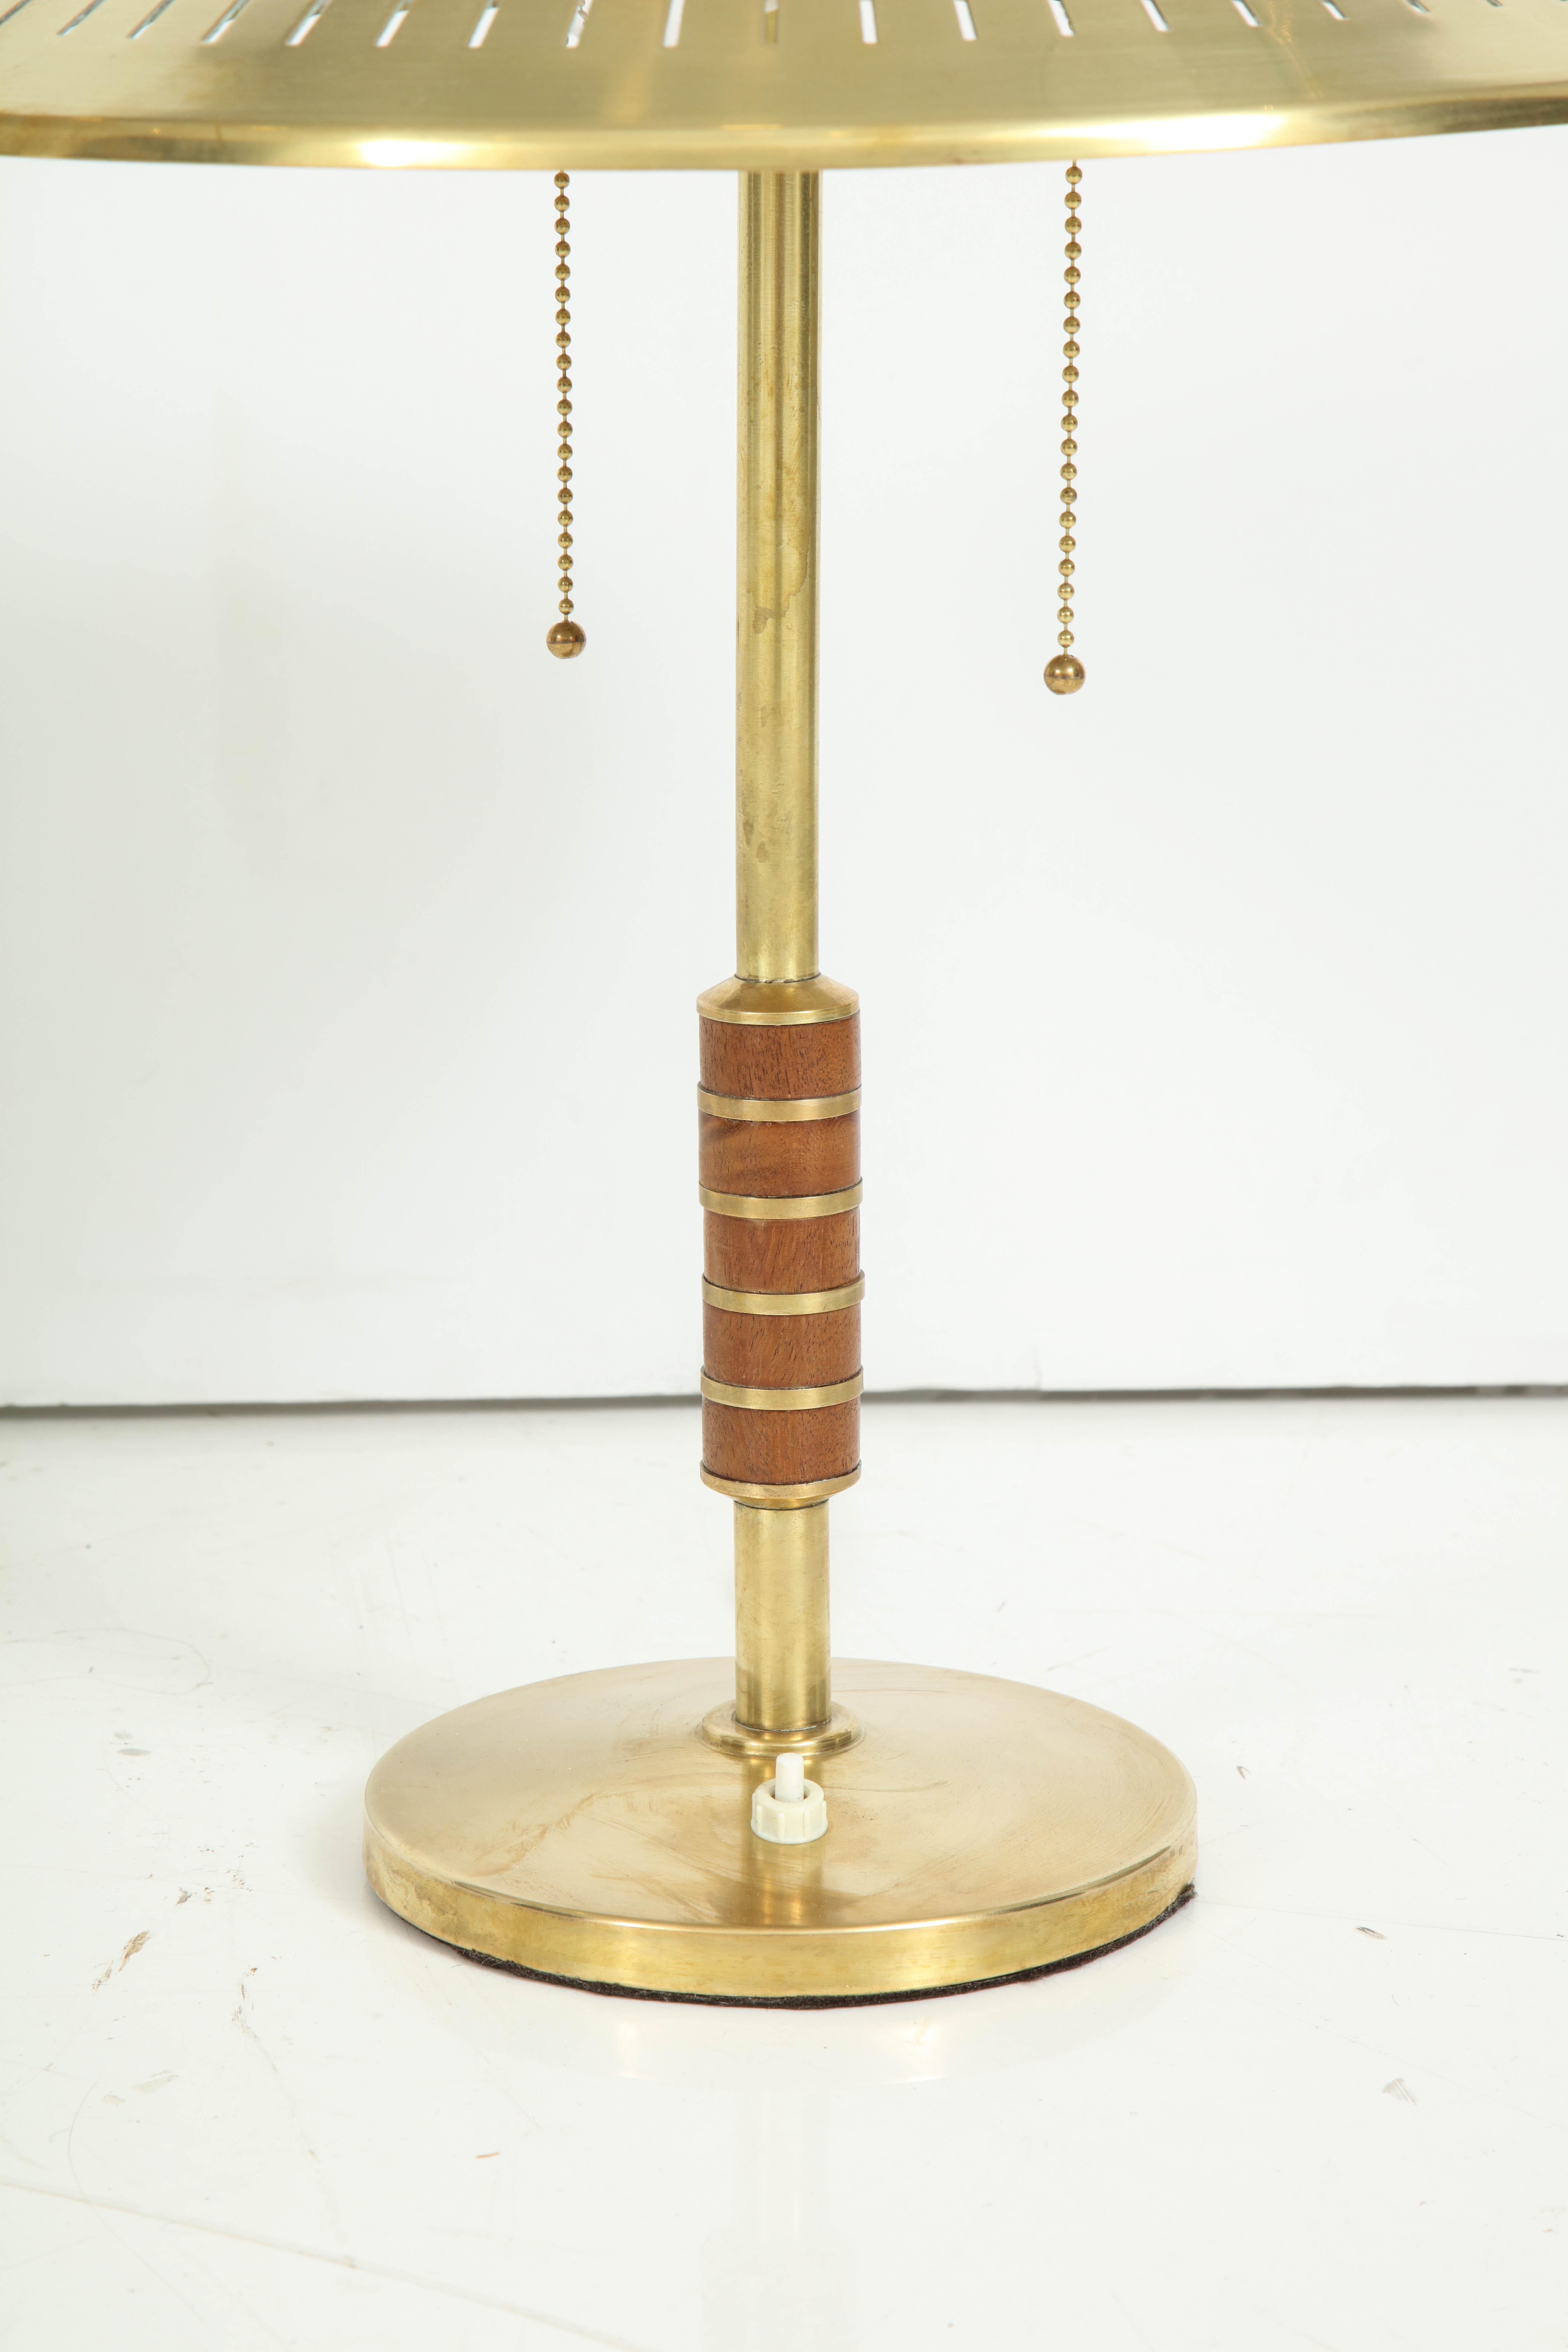 A Danish brass table lamp produced by Lyfa 1956 and designed by Bent Karlby. Model B146. Solid brass cone form shade with two-lights , stem with teak banding. Re-wire for the US. Two 60 watt max.